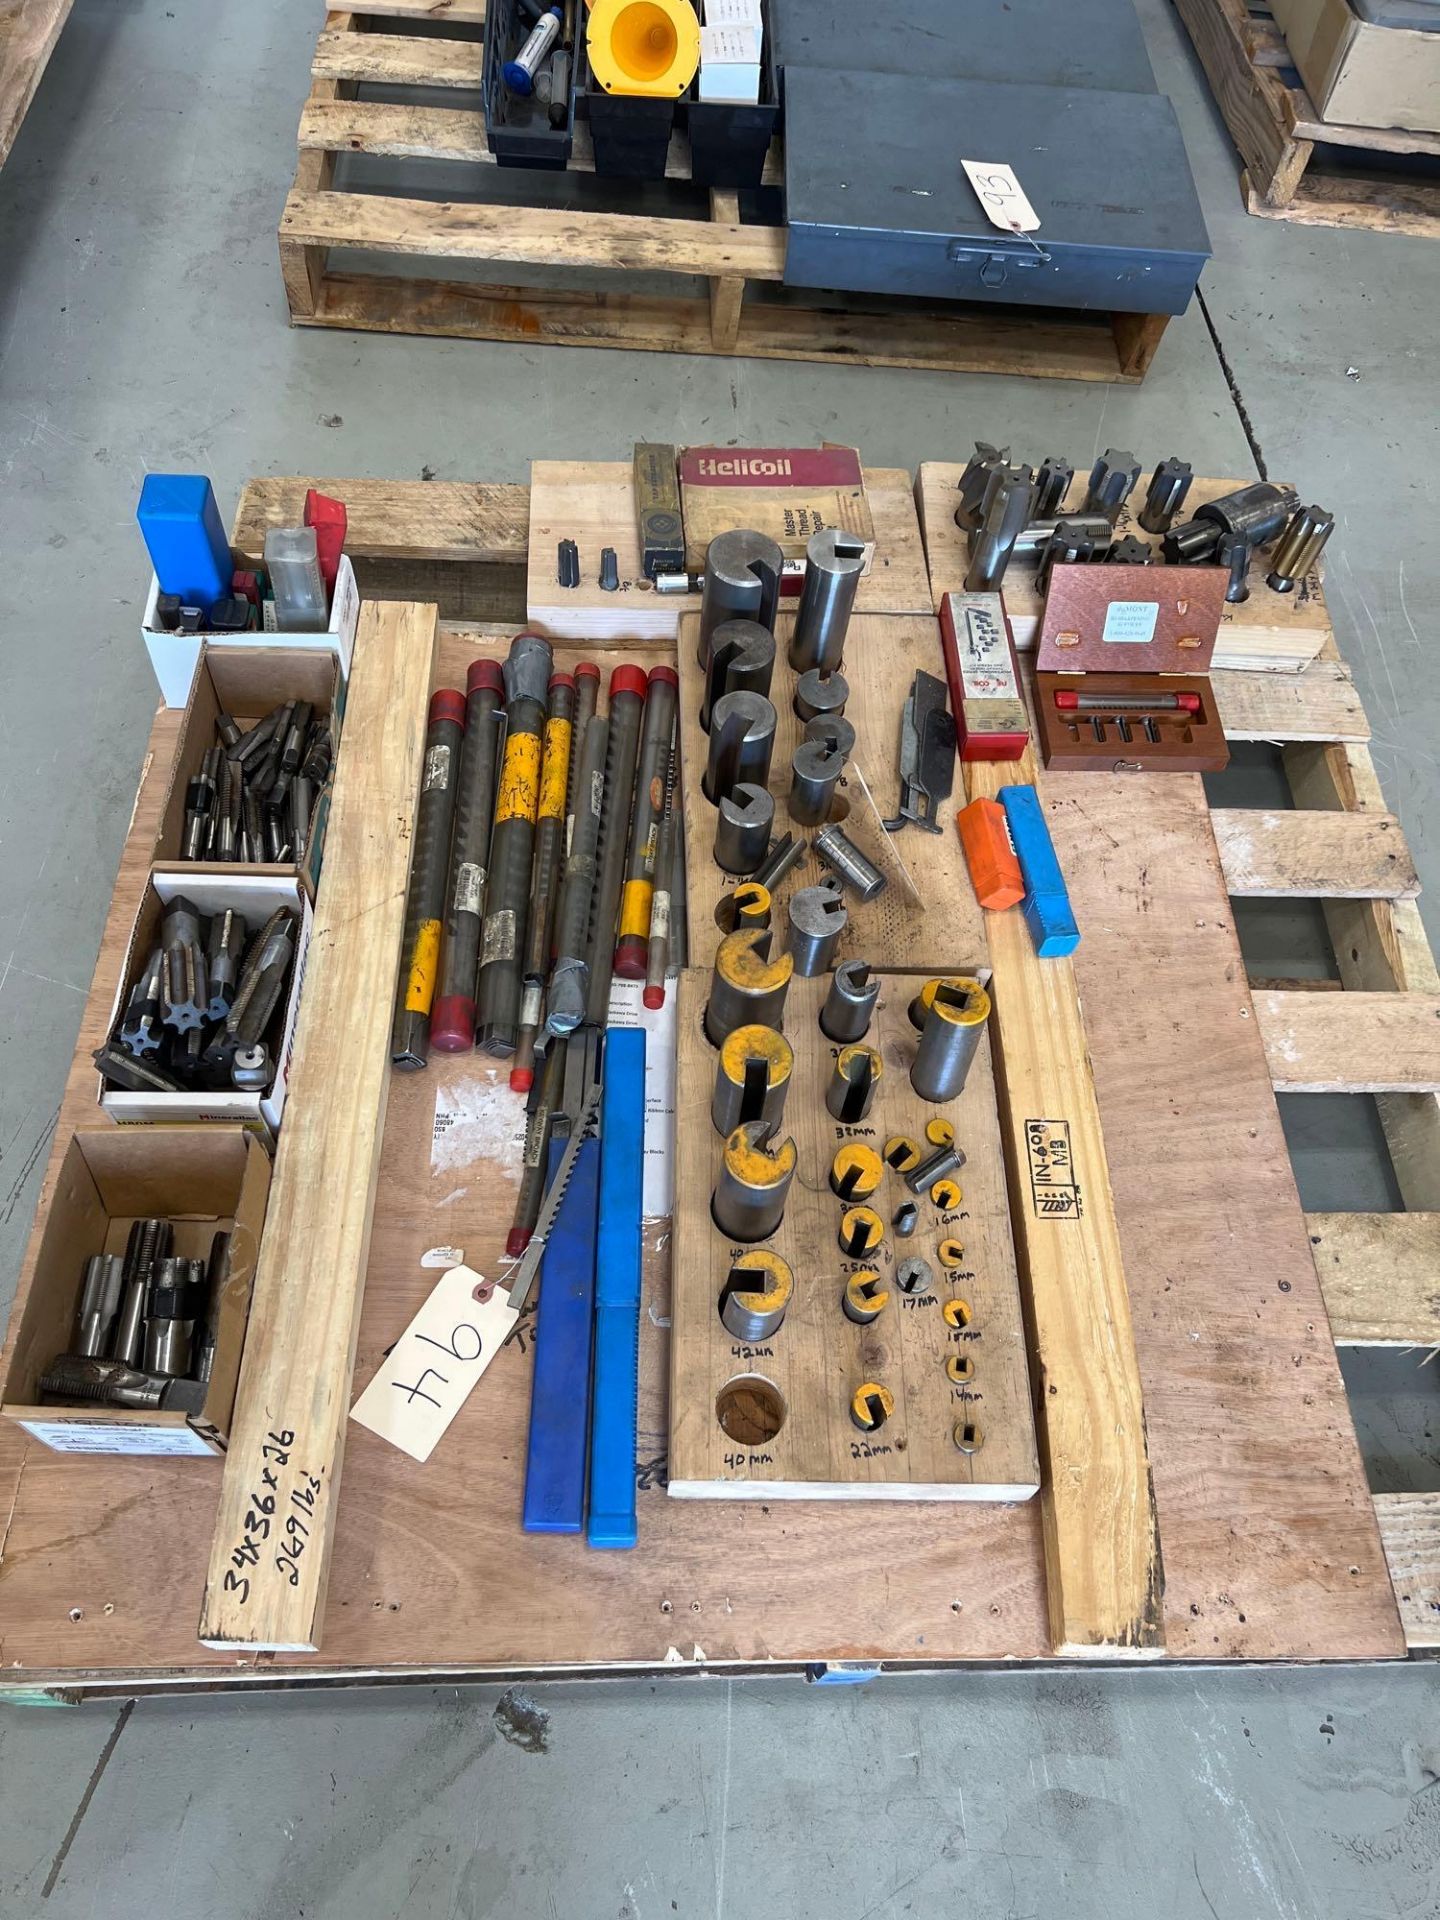 Lot of Broaching Tools, Taps, & Helicoil Items on Skid